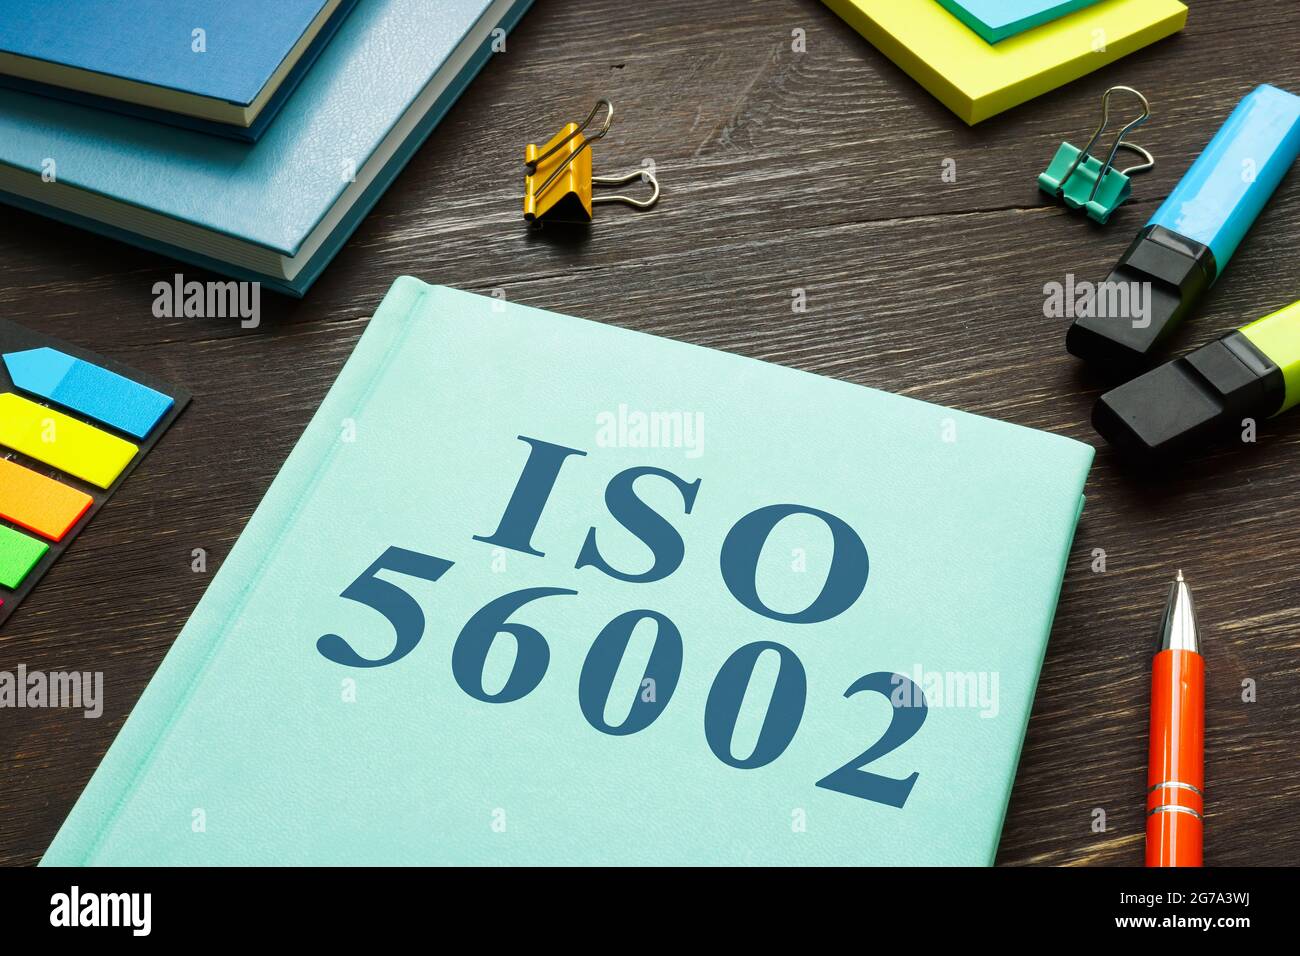 Book about iso 56002 or Innovation management system. Stock Photo